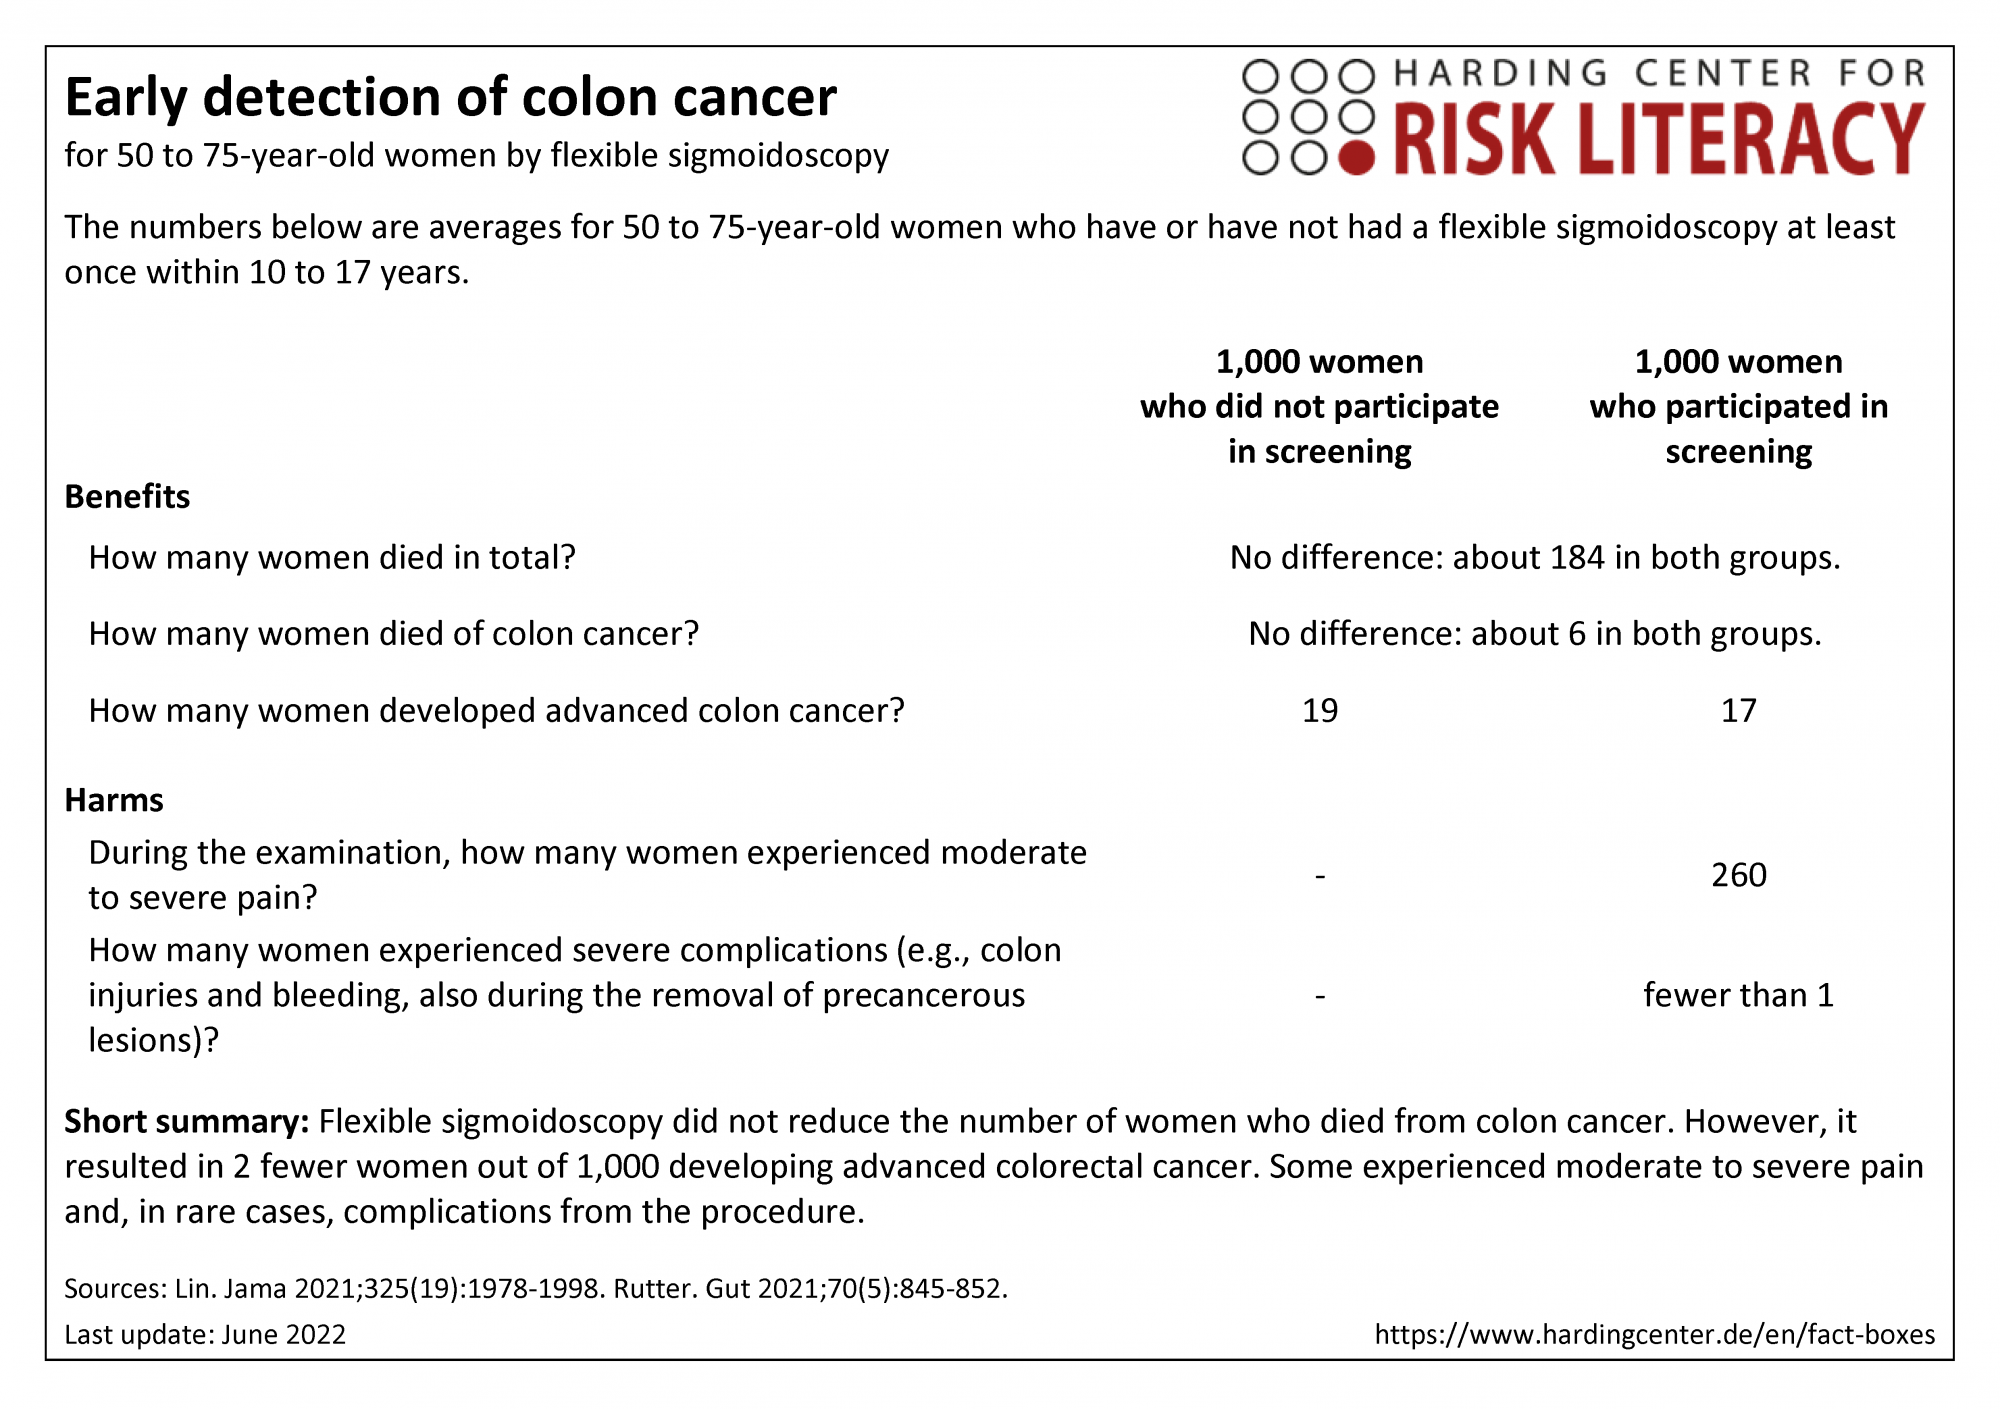 Fact box early detection of colon cancer by flexible sigmoidoscopy in women